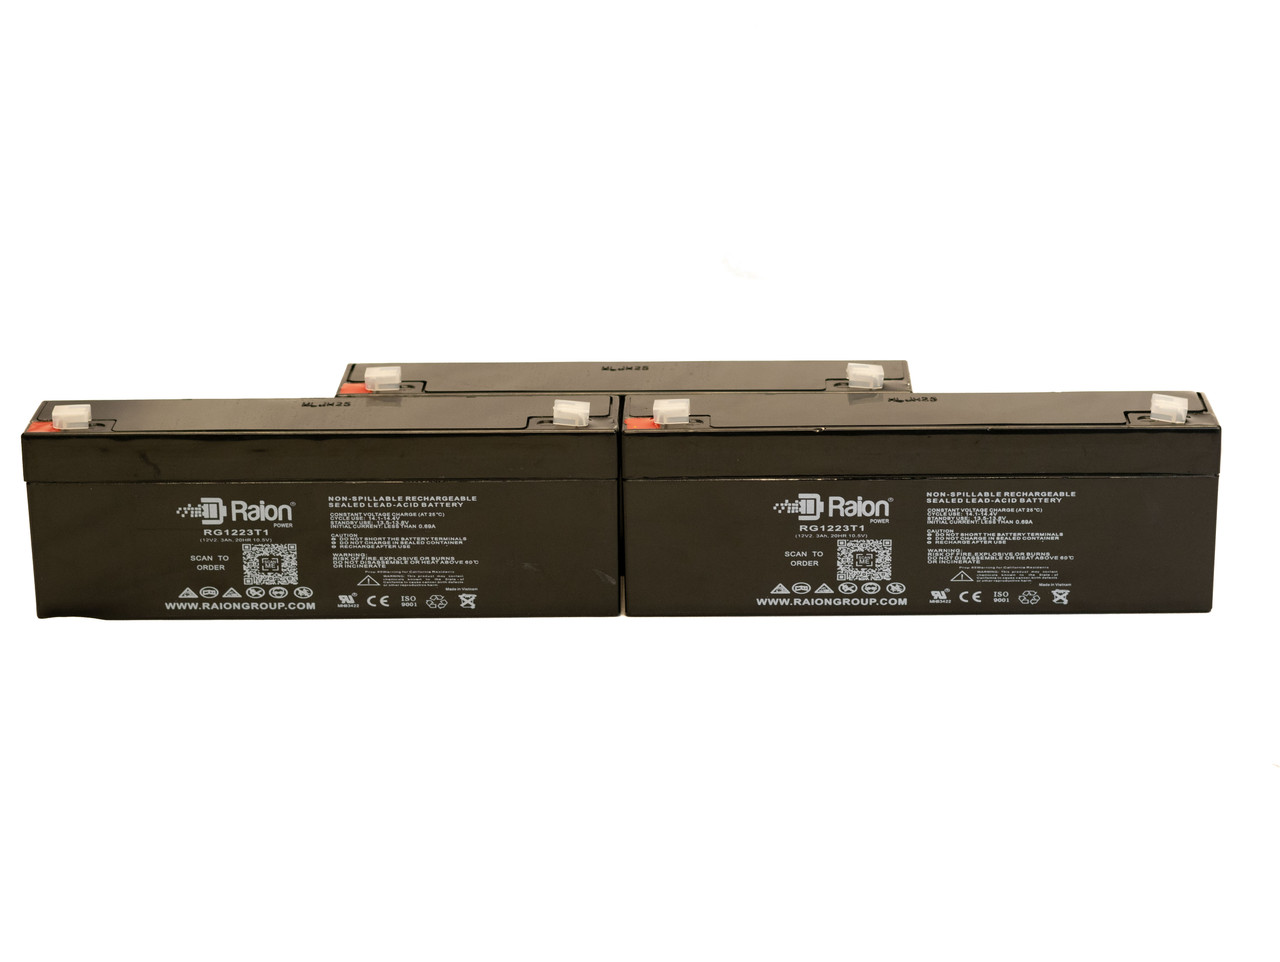 Raion Power 12V 2.3Ah RG1223T1 Replacement Medical Battery for Invivo Research Inc 4500 - 3 Pack